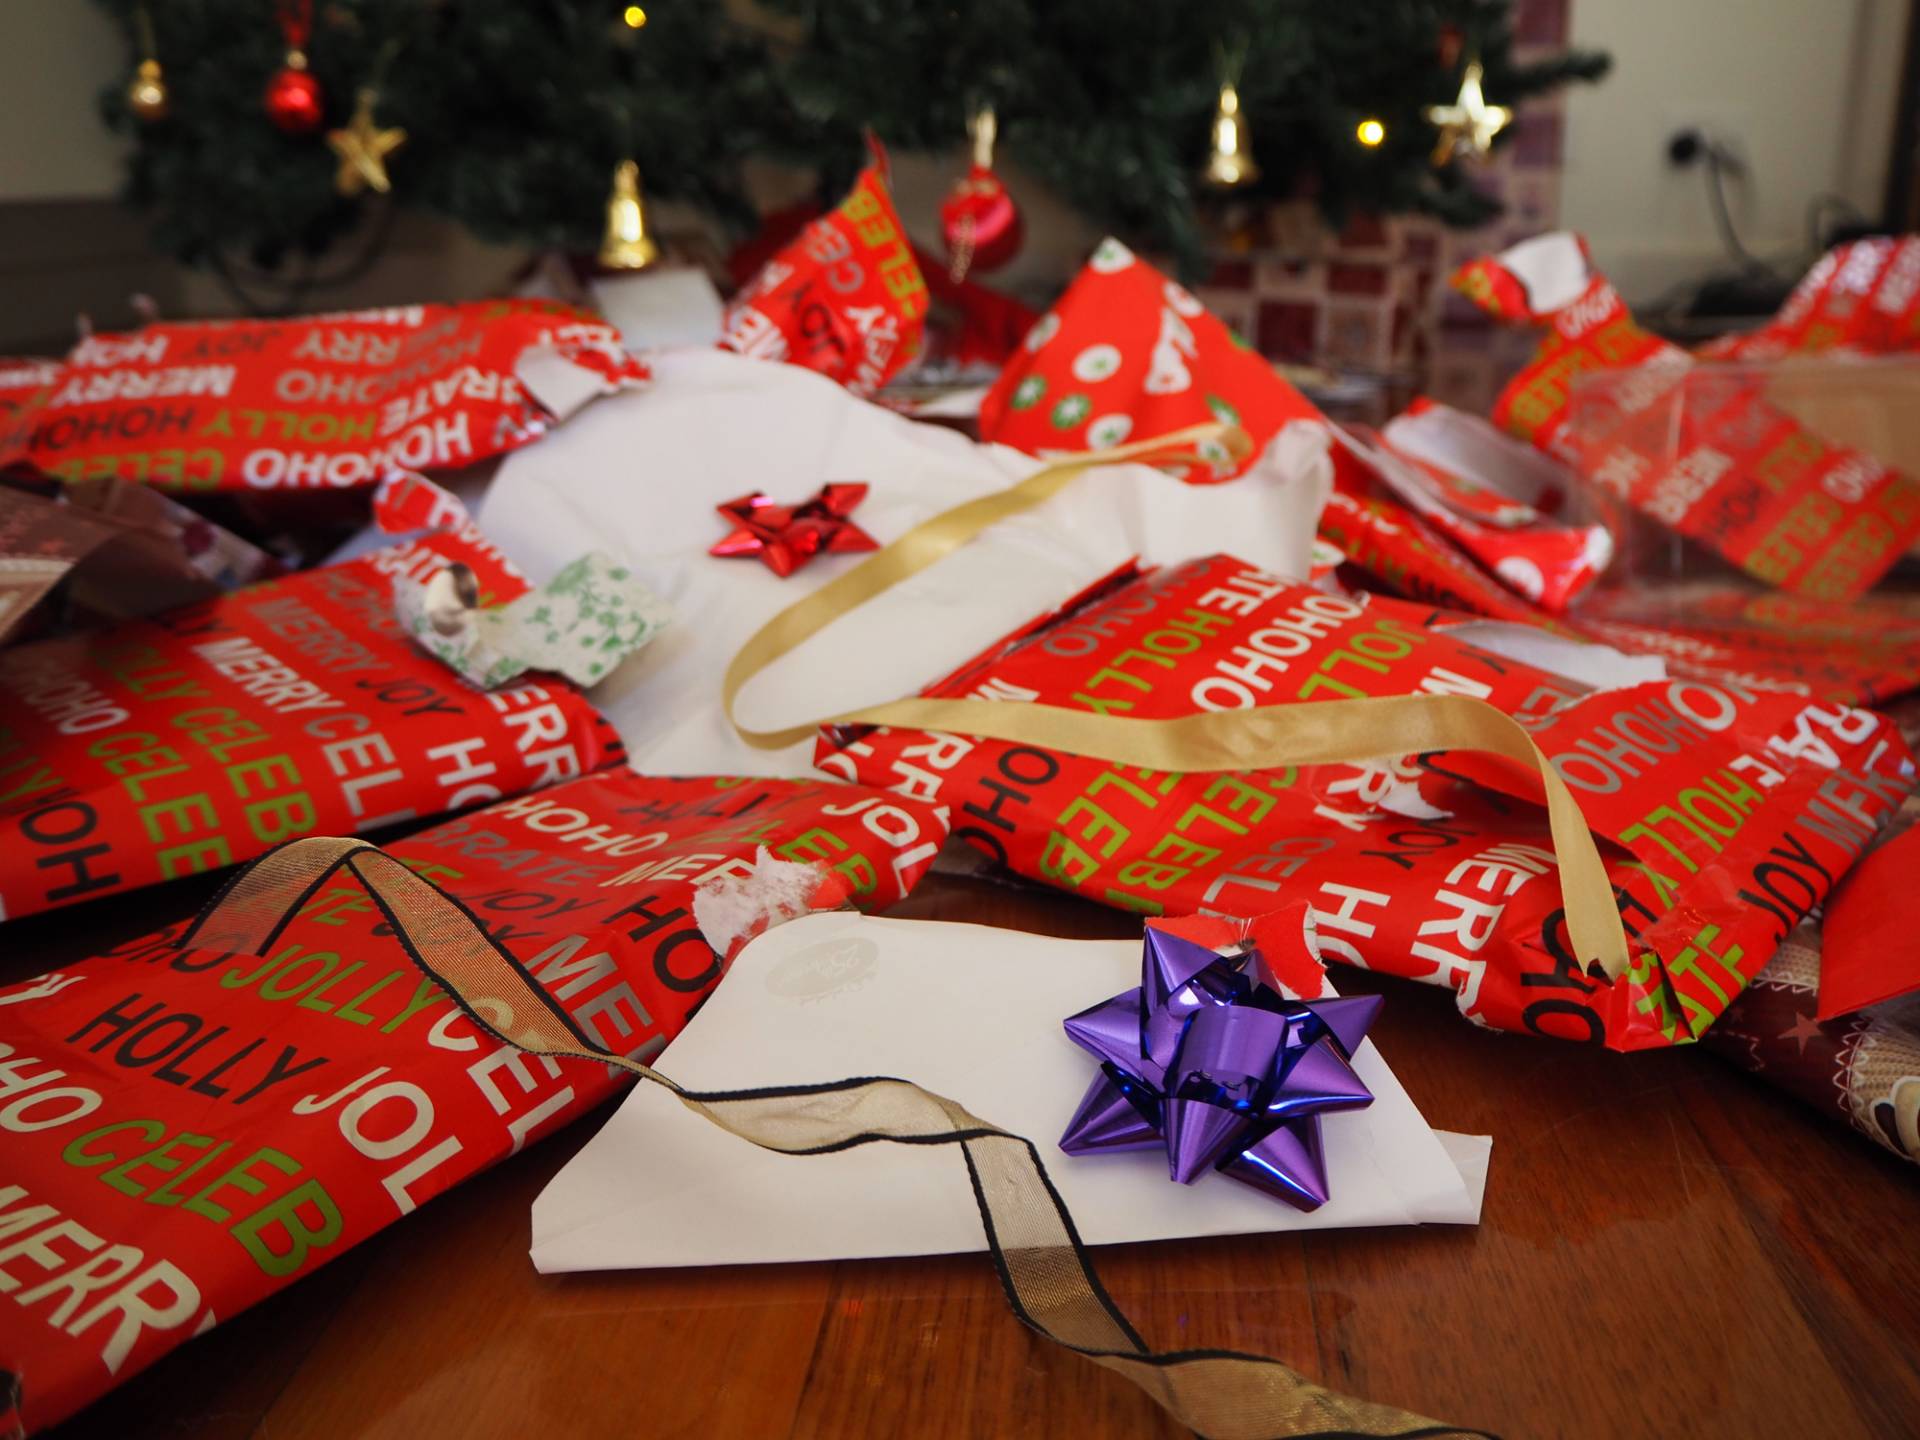 Is Wrapping Paper Recyclable: Truths and Myths